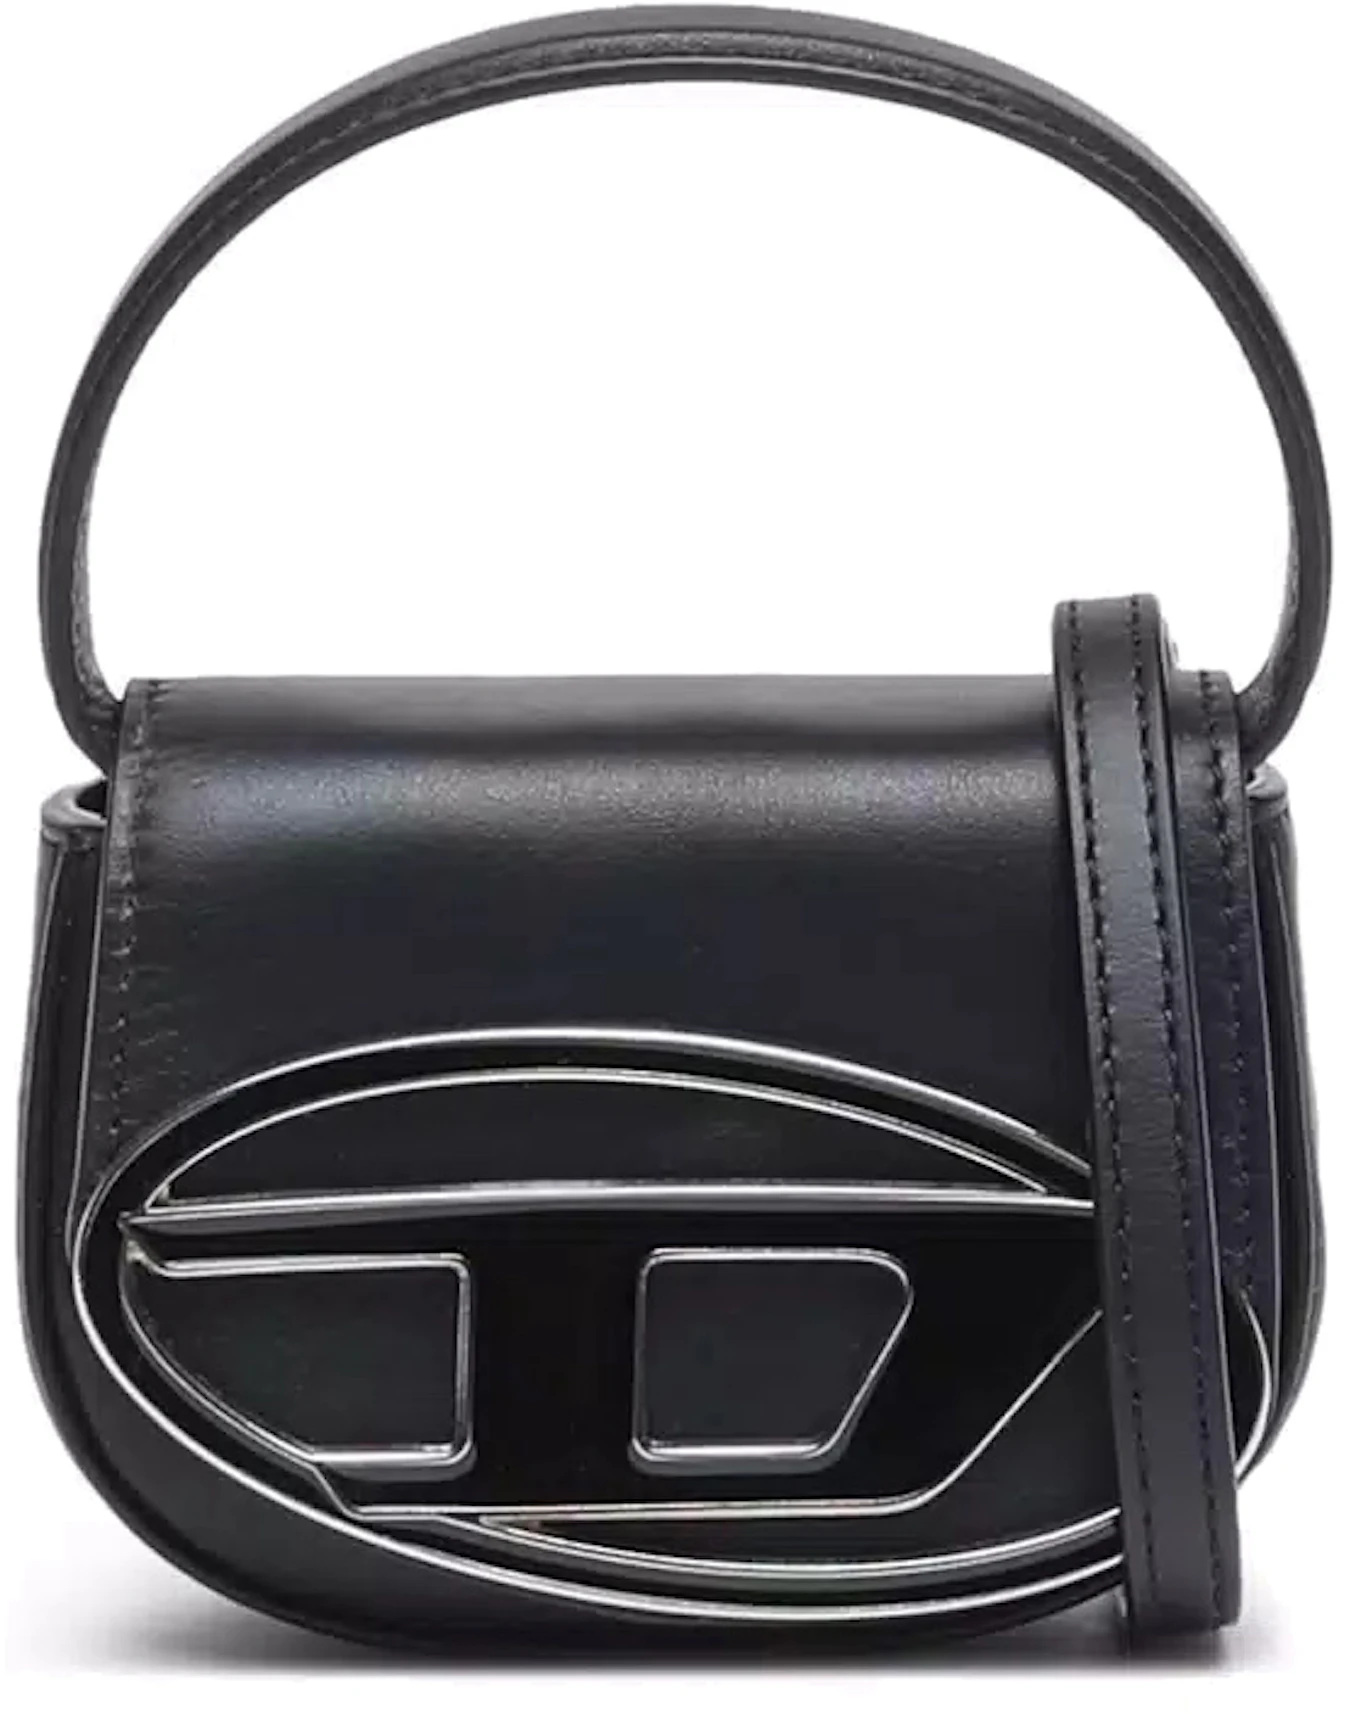 Diesel 1DR XS Mini Bag with D Plaque Black in Nappa Leather with Silver ...